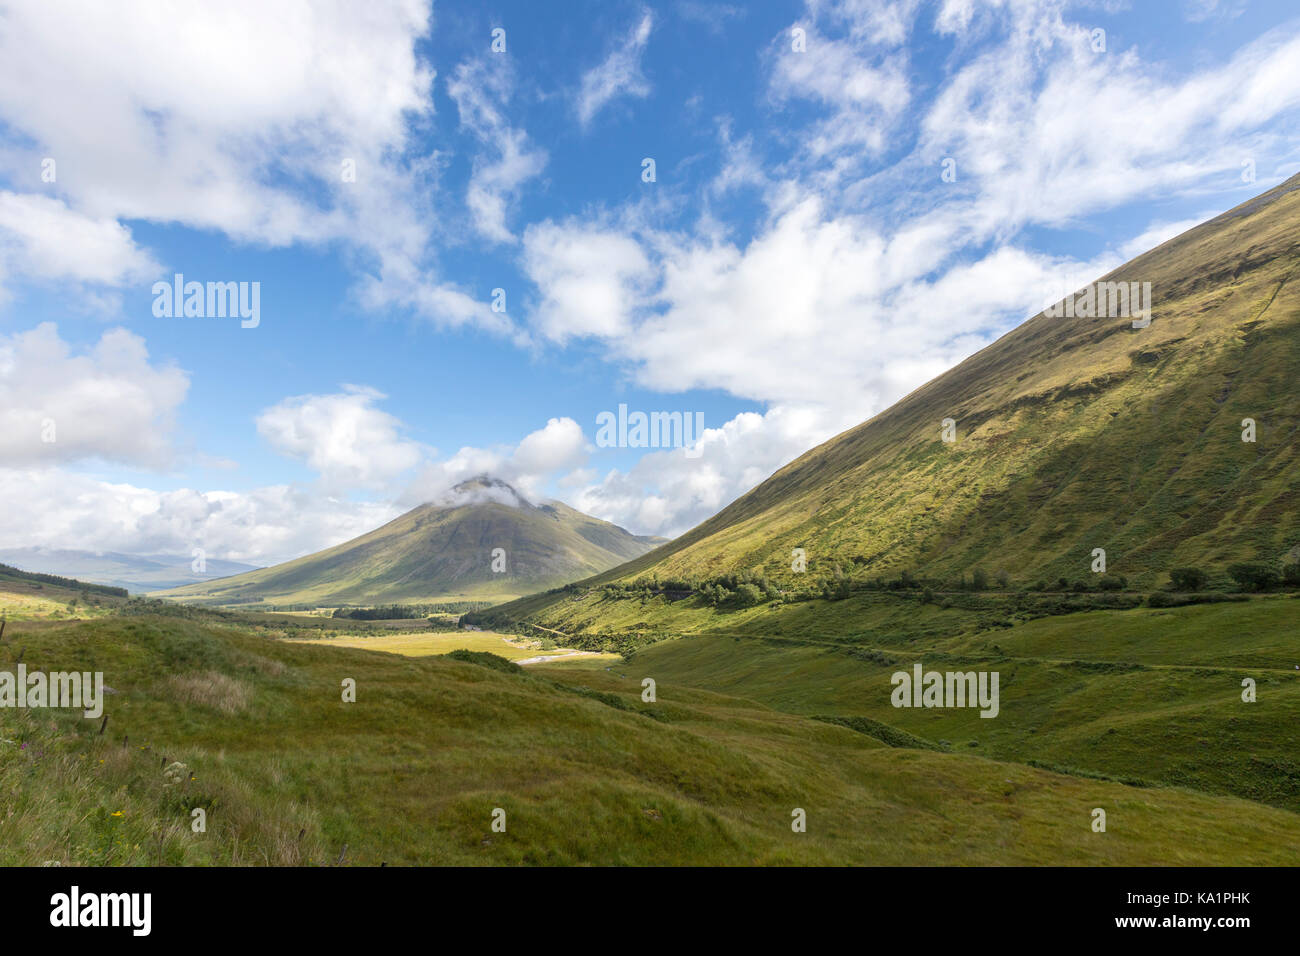 Scottish landscape near Tyndrum in the A82 road, Stirling and Falkirk, Scotland, UK Stock Photo